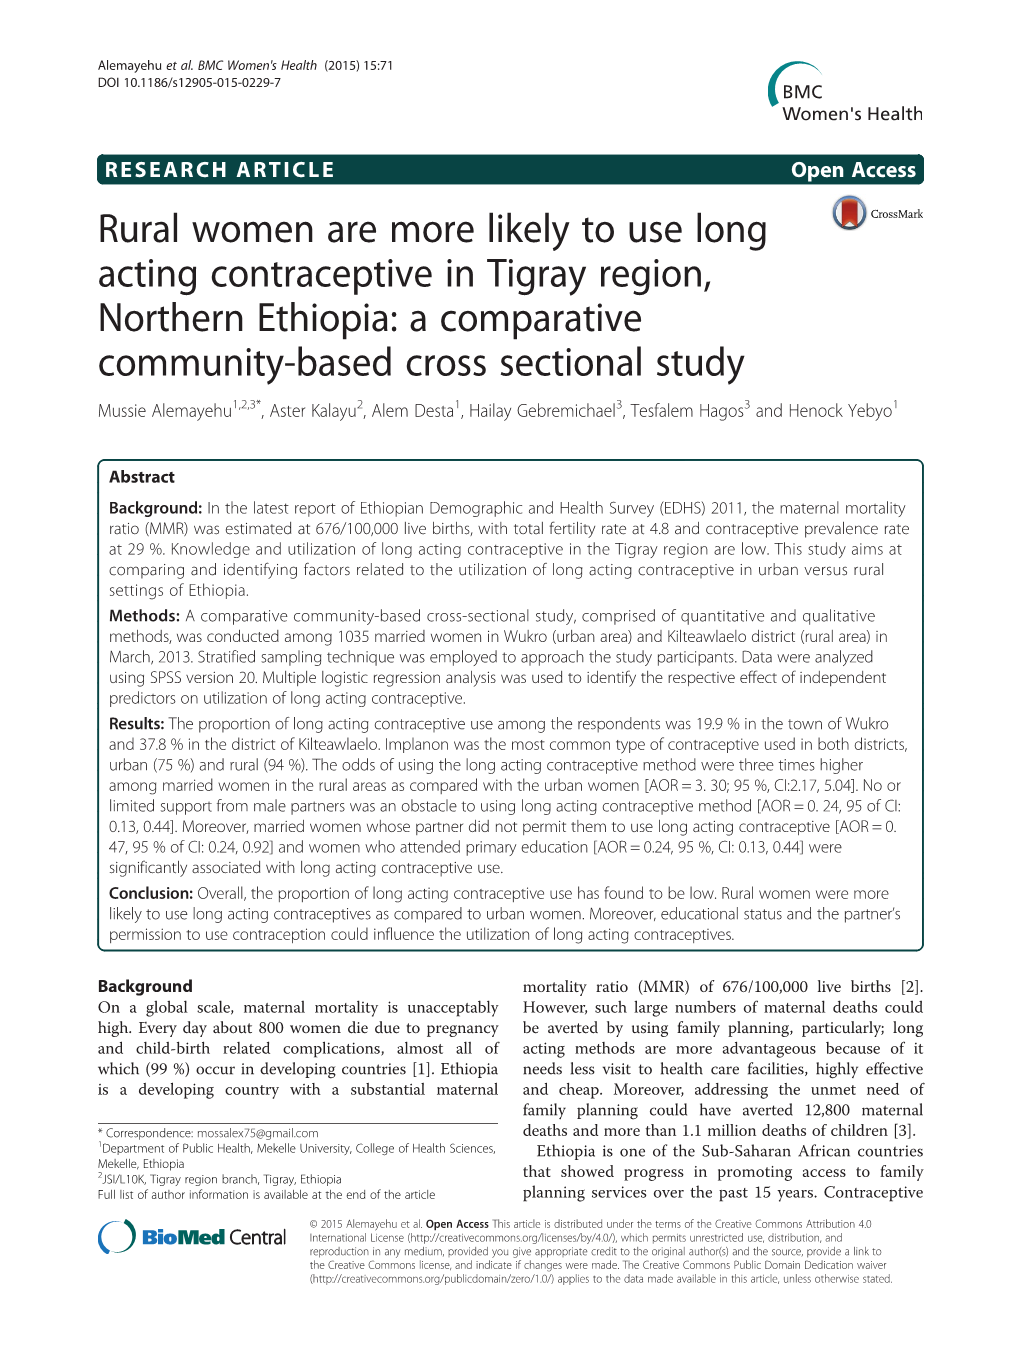 Rural Women Are More Likely to Use Long Acting Contraceptive in Tigray Region, Northern Ethiopia: a Comparative Community-Based